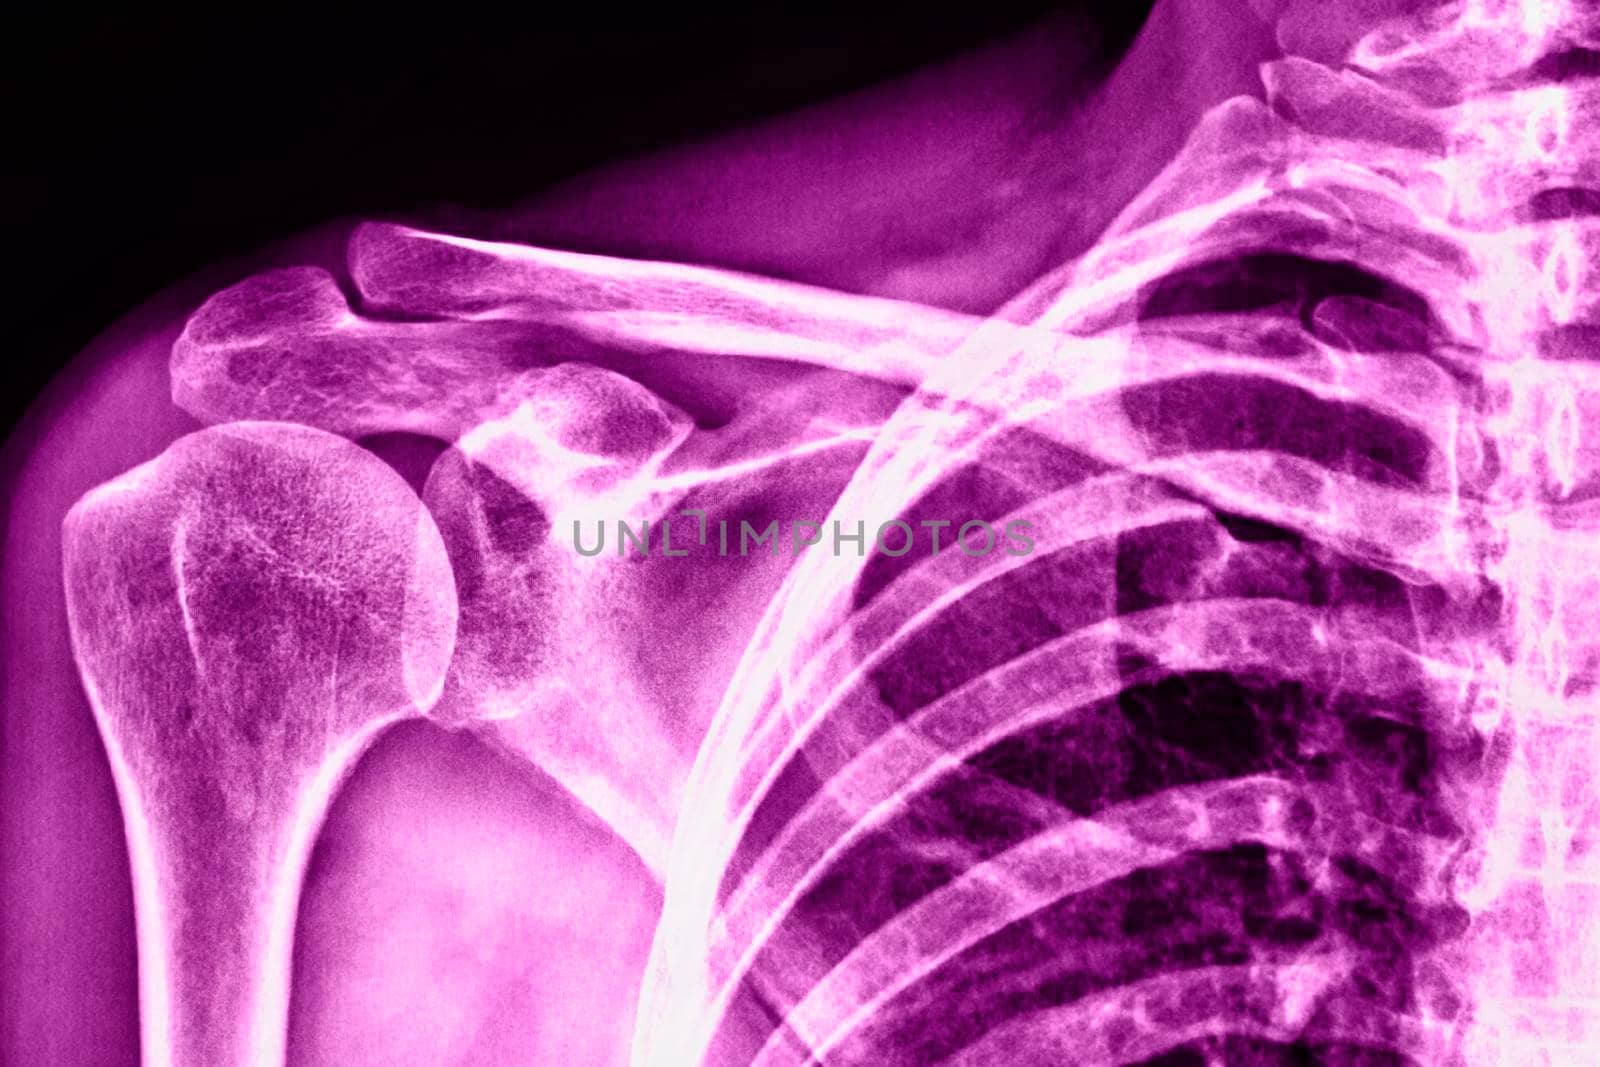 Close up of shoulder x-ray  by victimewalker